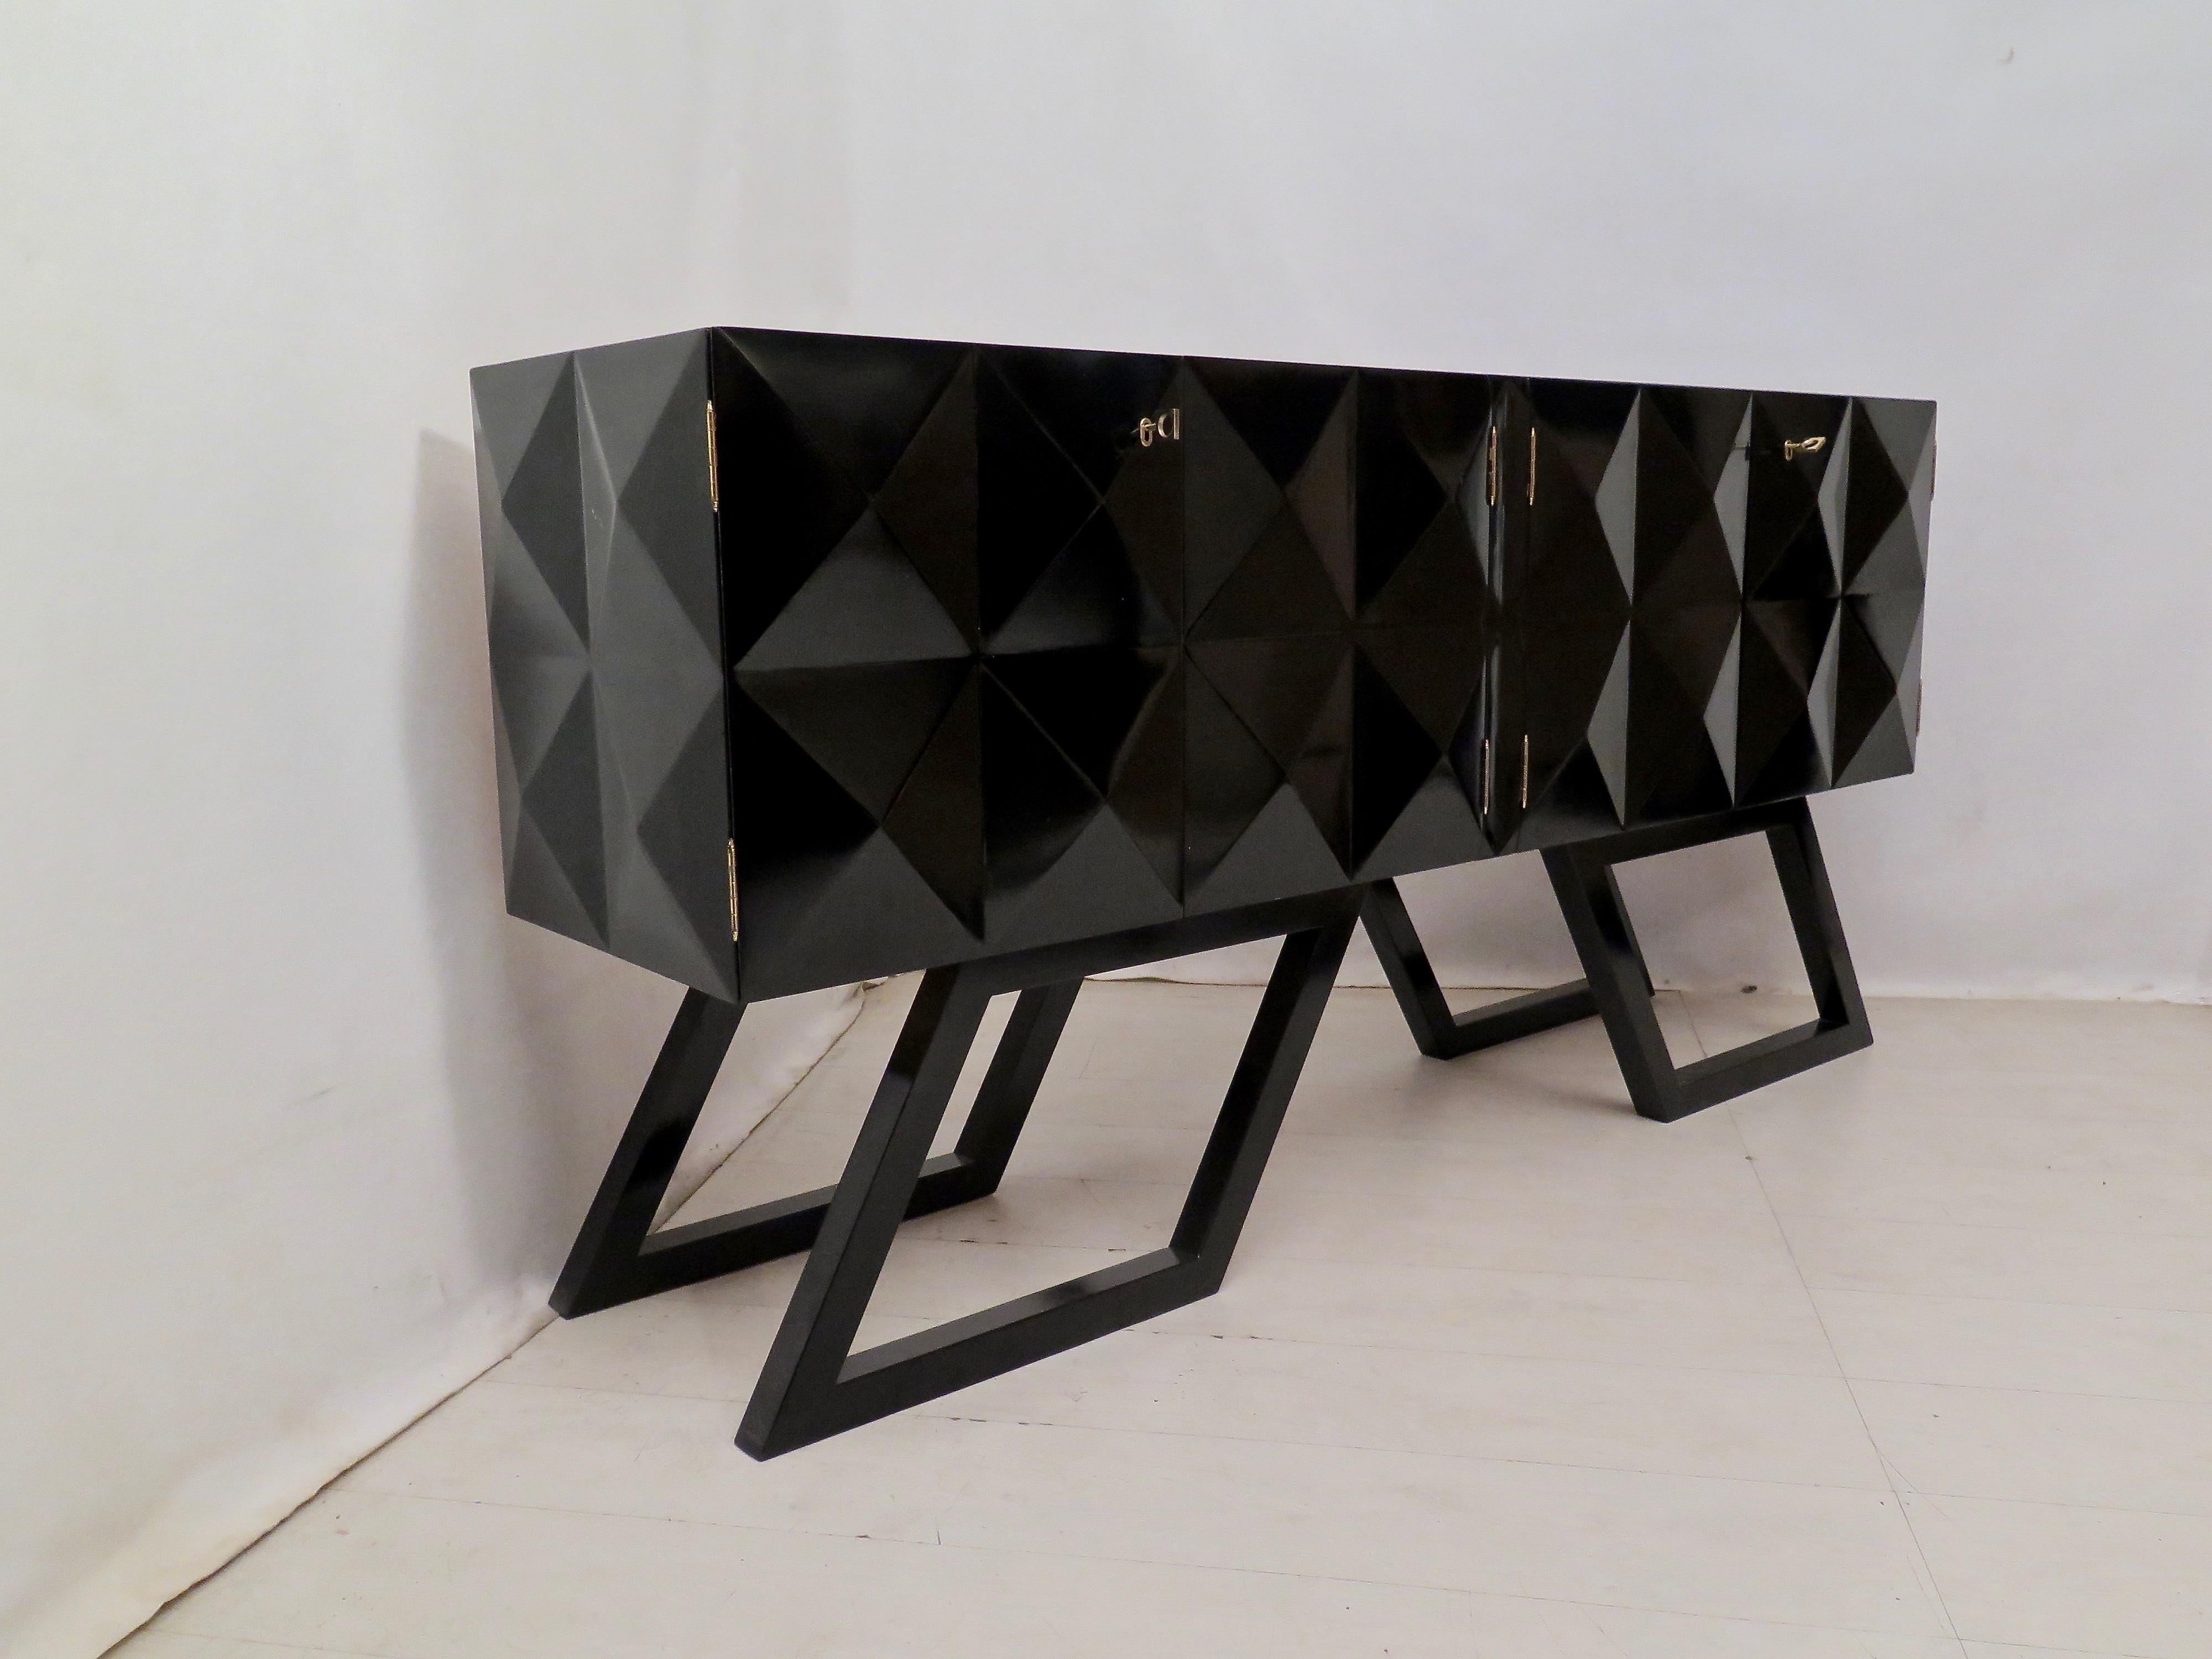 Sideboards of the middle of the century. All polished in black shellac. The structure is in wood, the top is smooth and polished in black shellac, the front and sides have a design formed by a series of pyramids with a square base. There are four